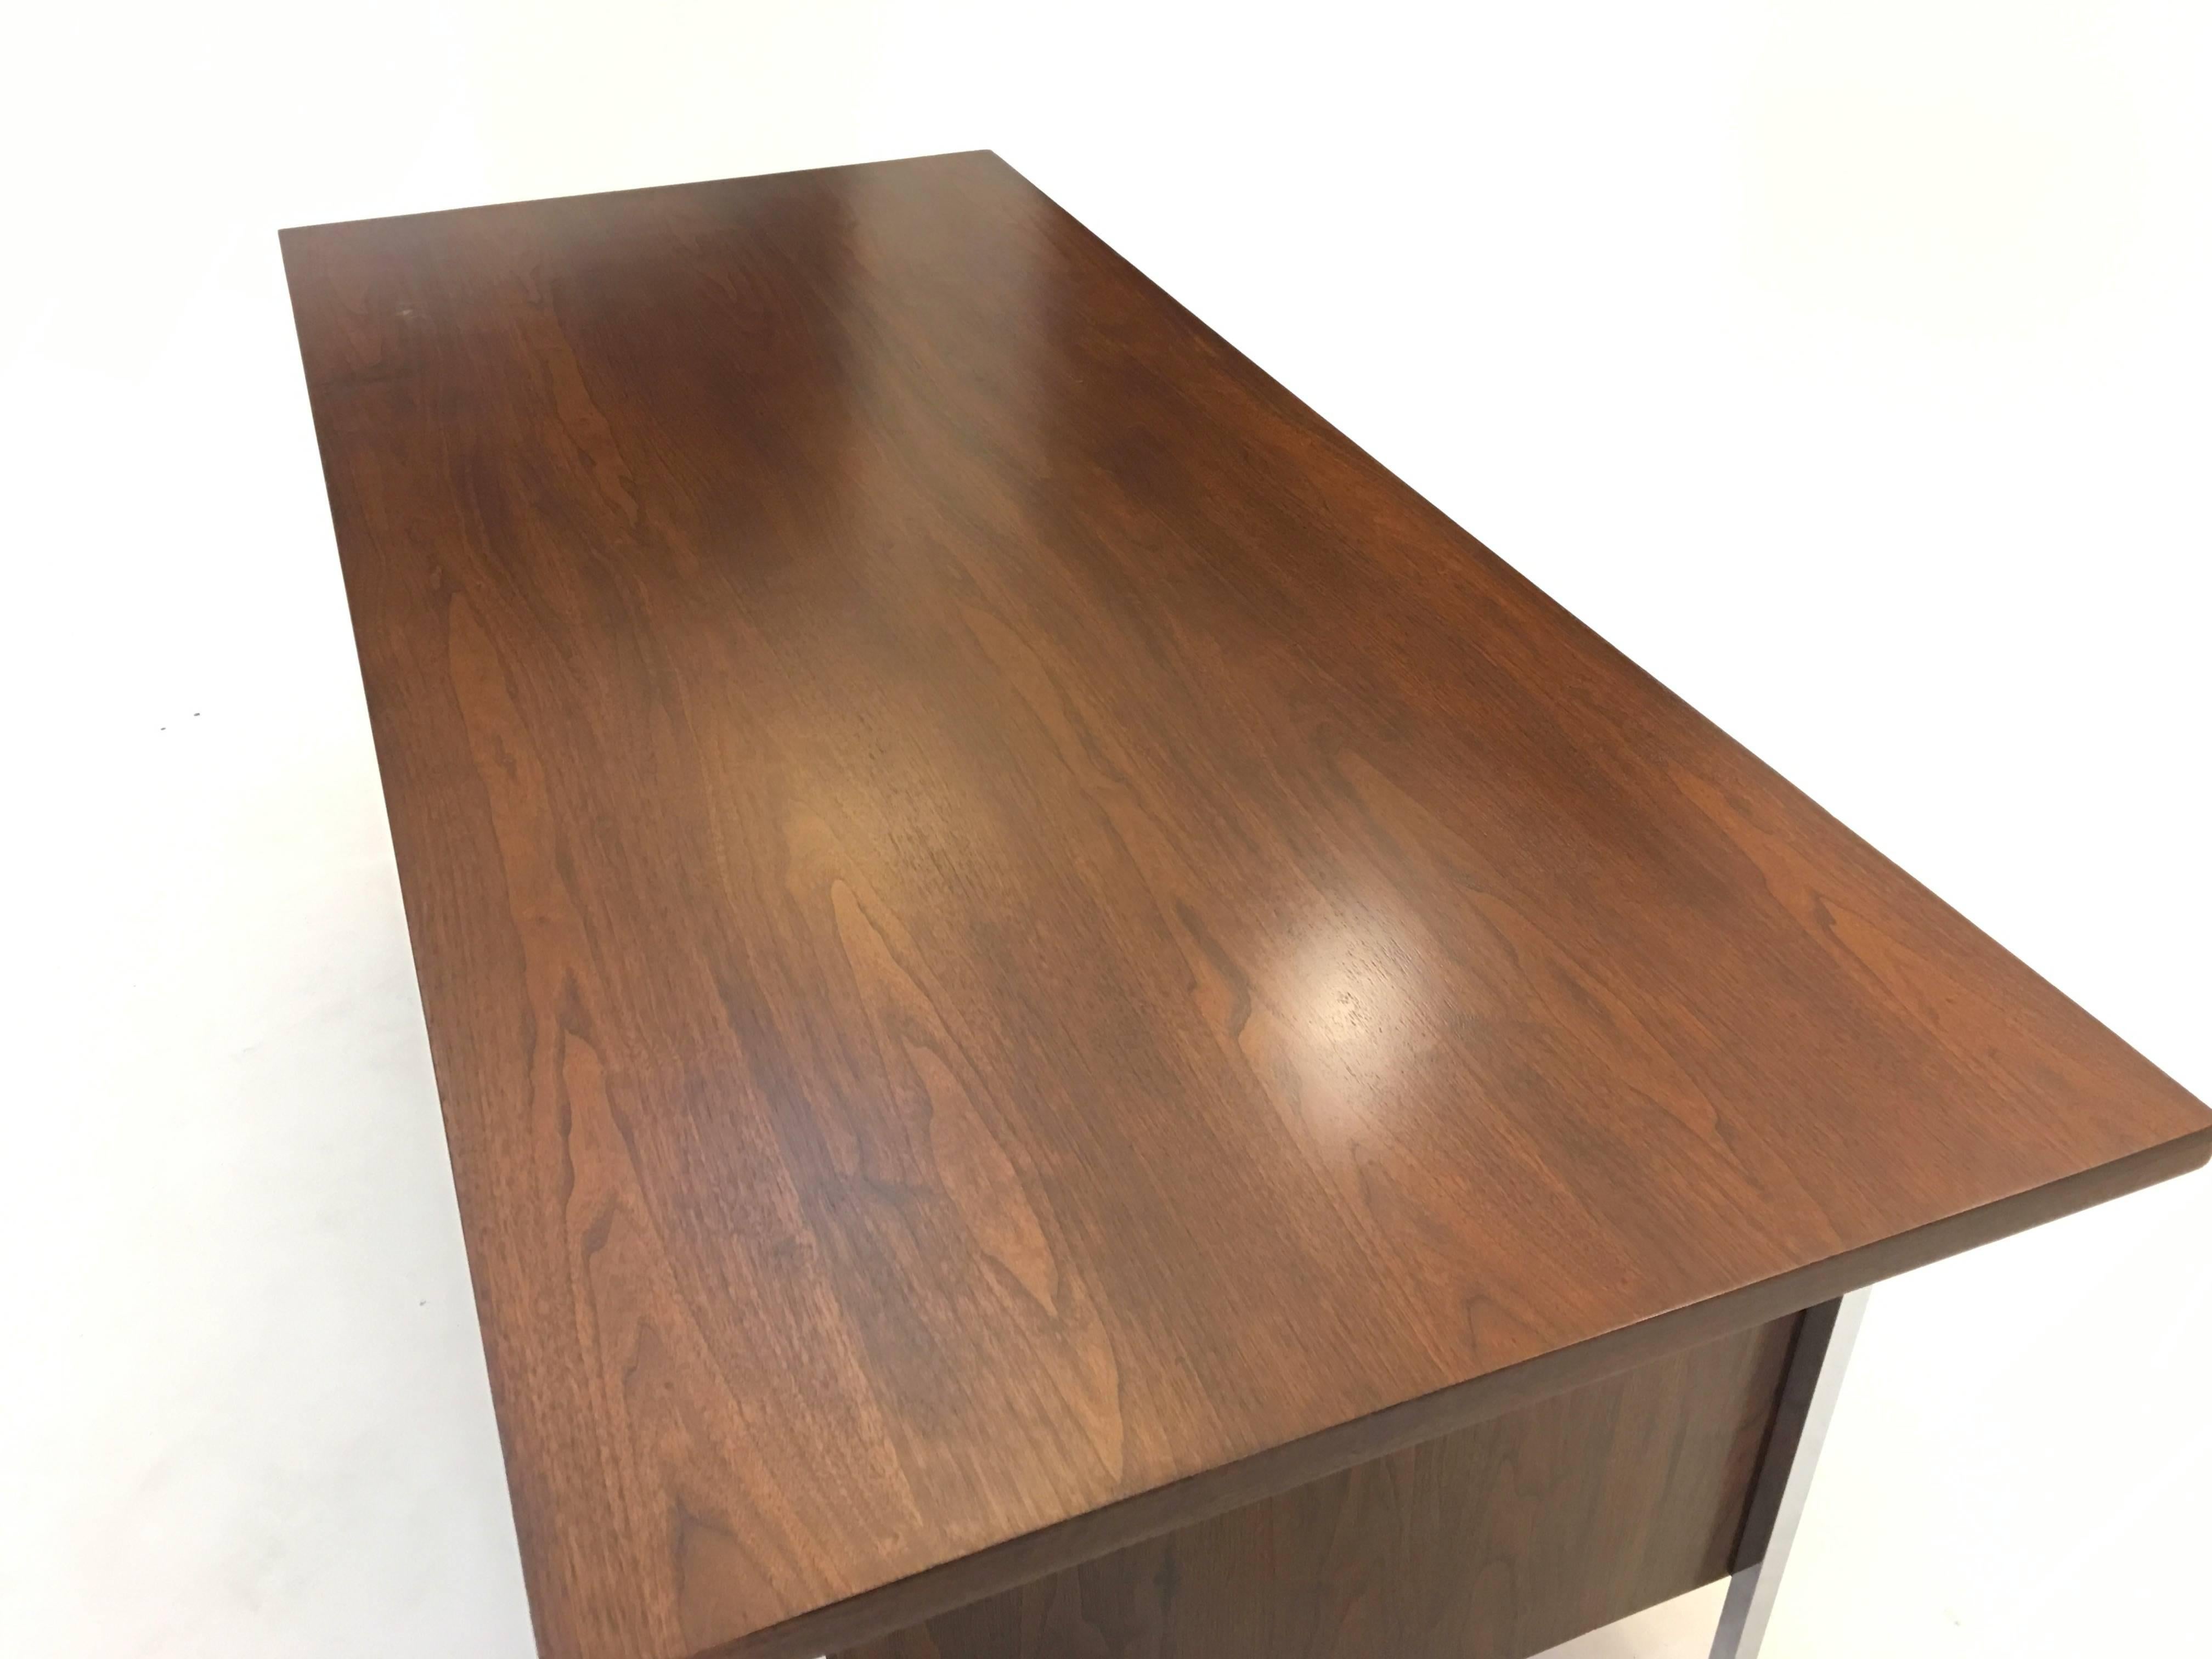 A very distinctive double pedestal executive desk with Minimalist design by Florence Knoll for Knoll Associates circa 1952. One of two by Knoll we have on offer, the other being a single pedestal desk.

Measures 28.75" tall, 72" wide and